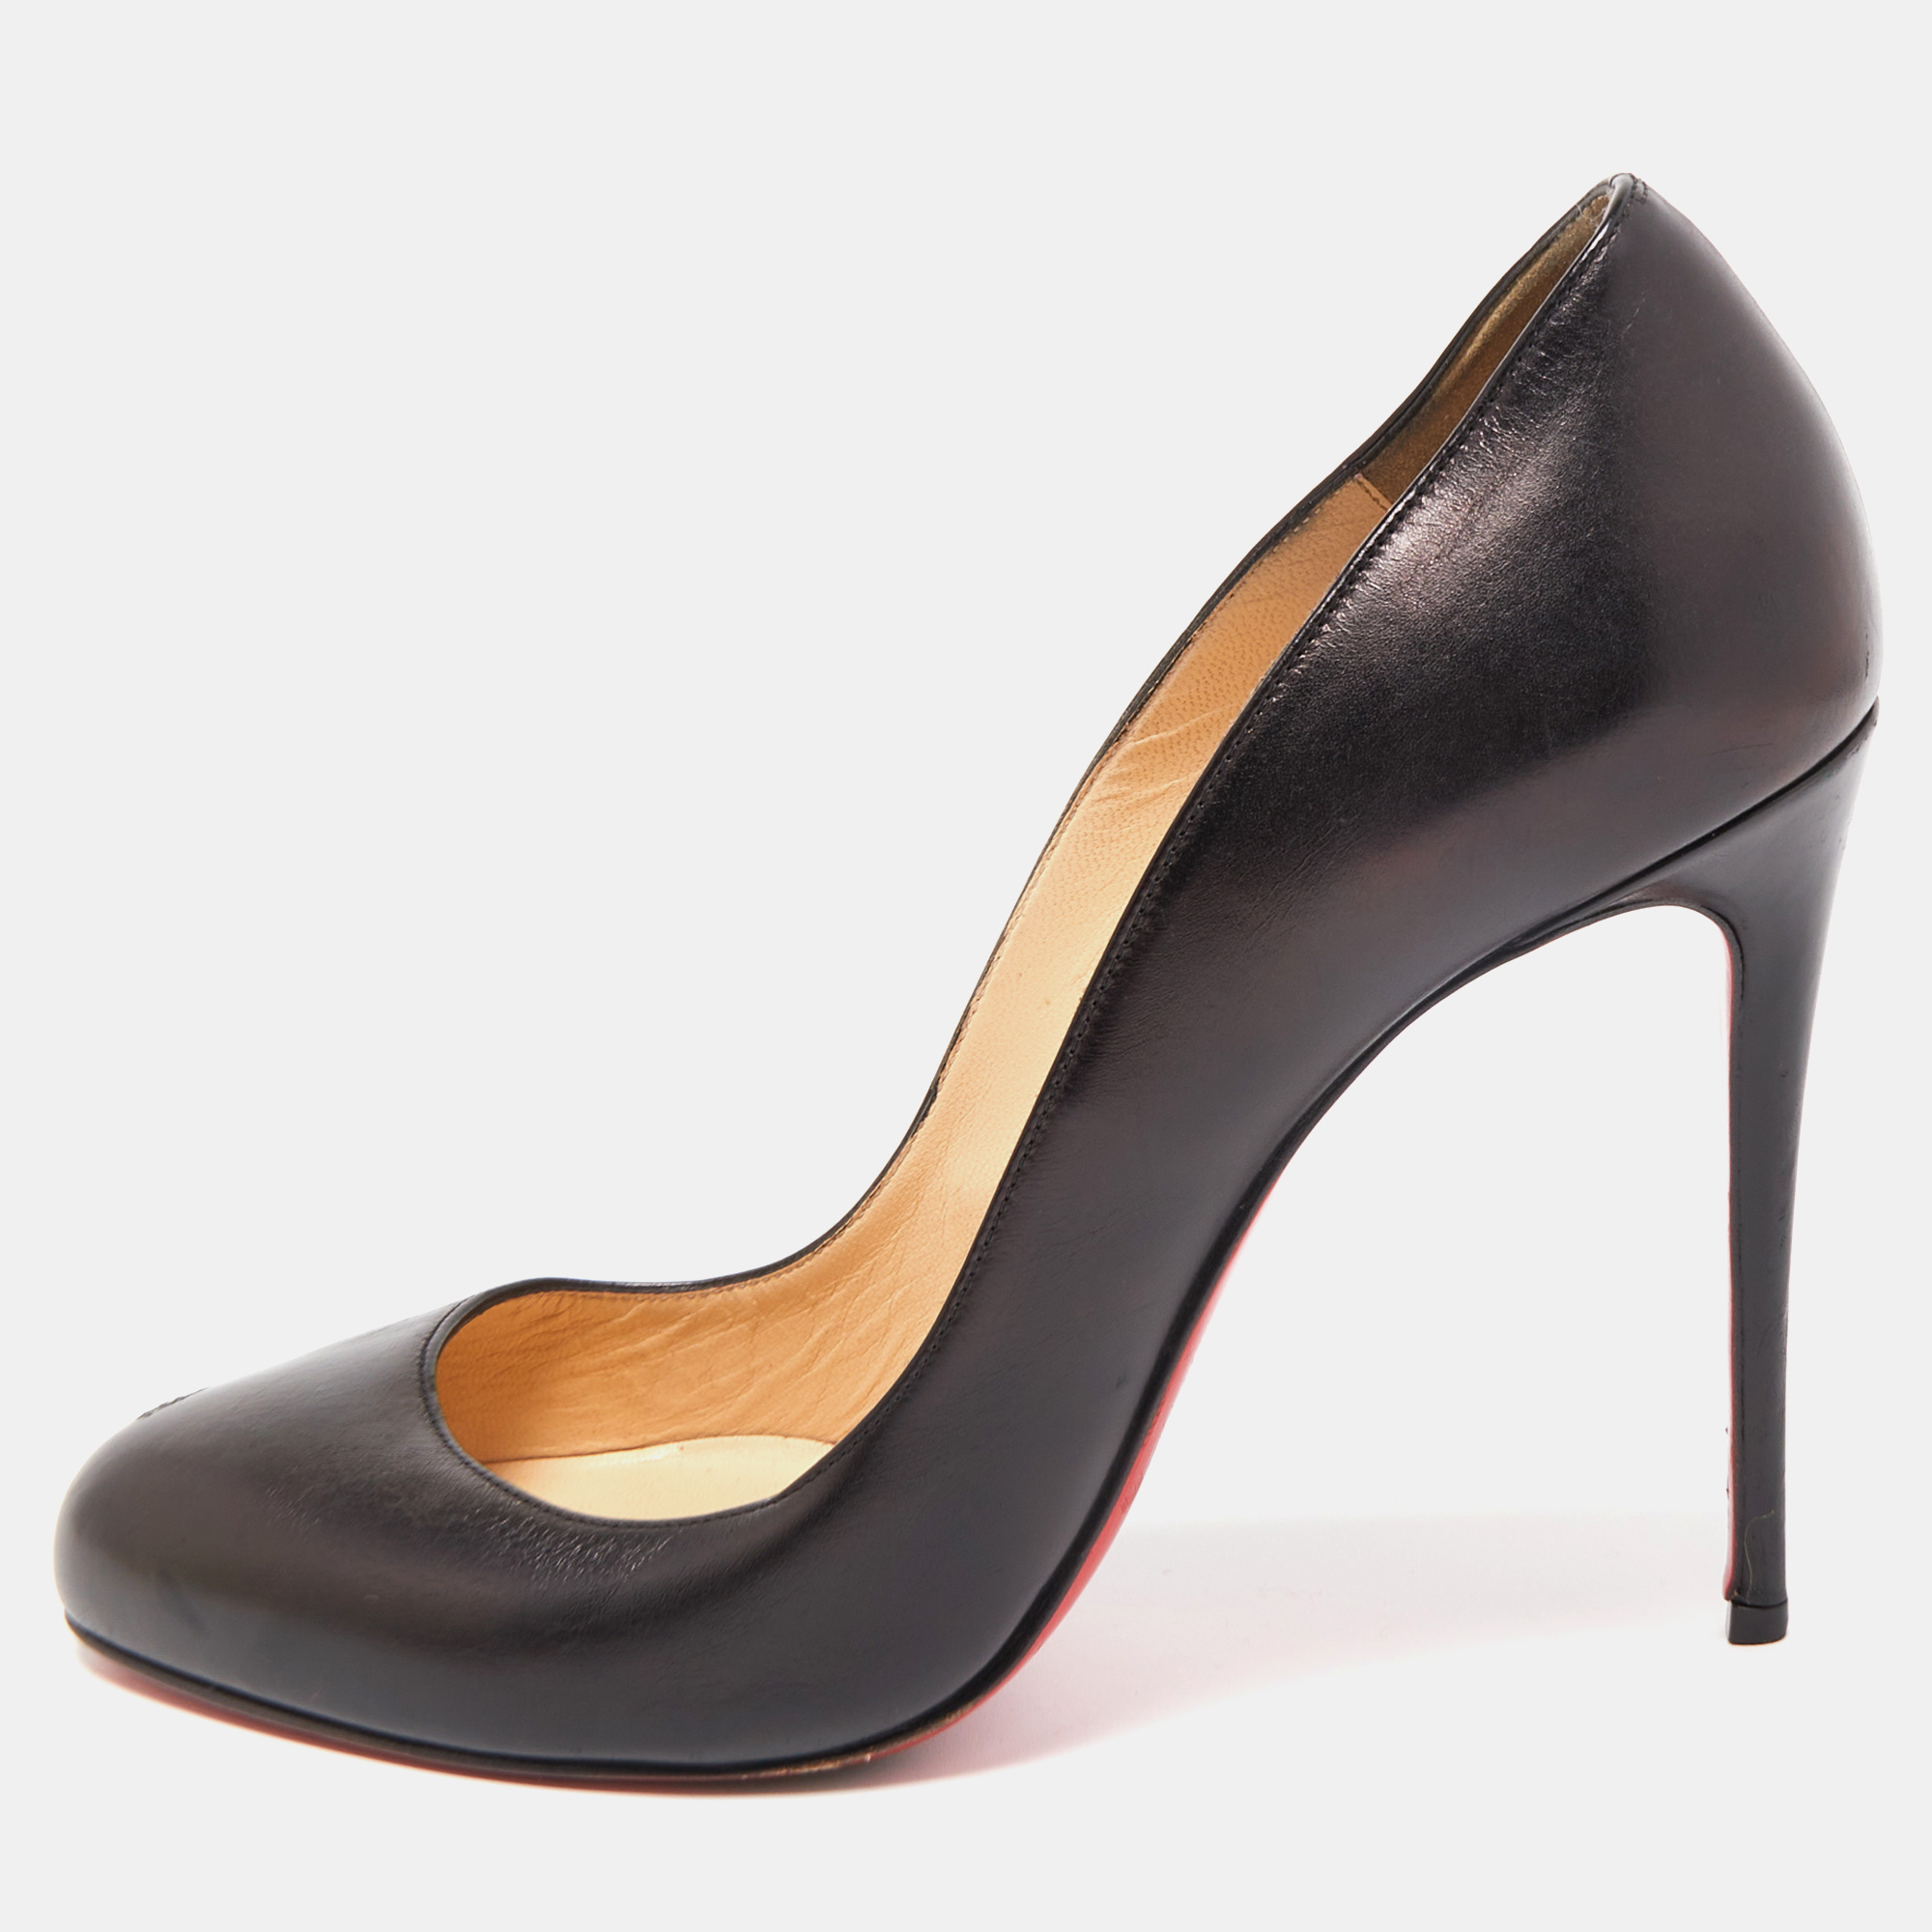 Pre-owned Christian Louboutin Black Leather Fifi Pumps Size 38